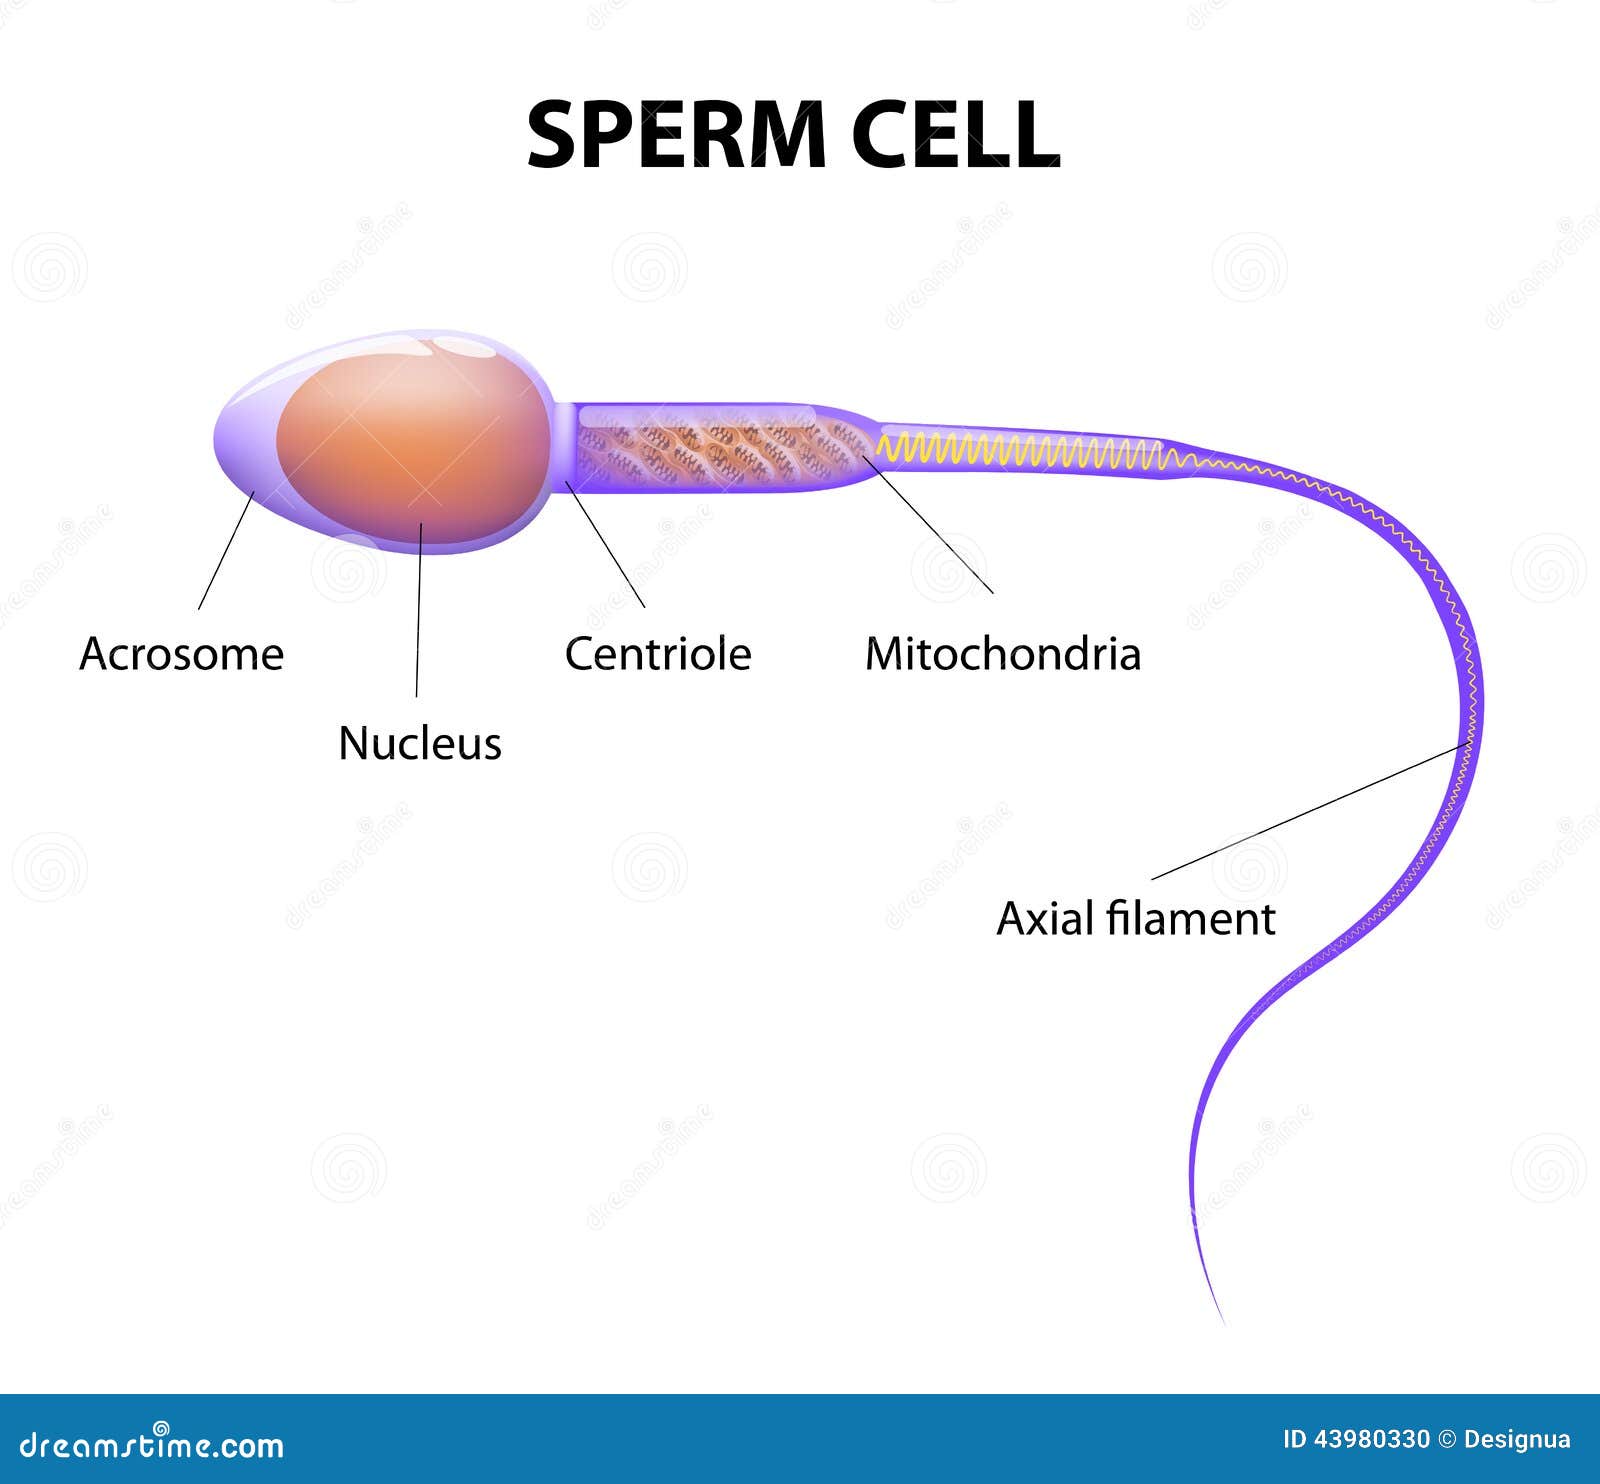 Labeled diagram of a sperm cell